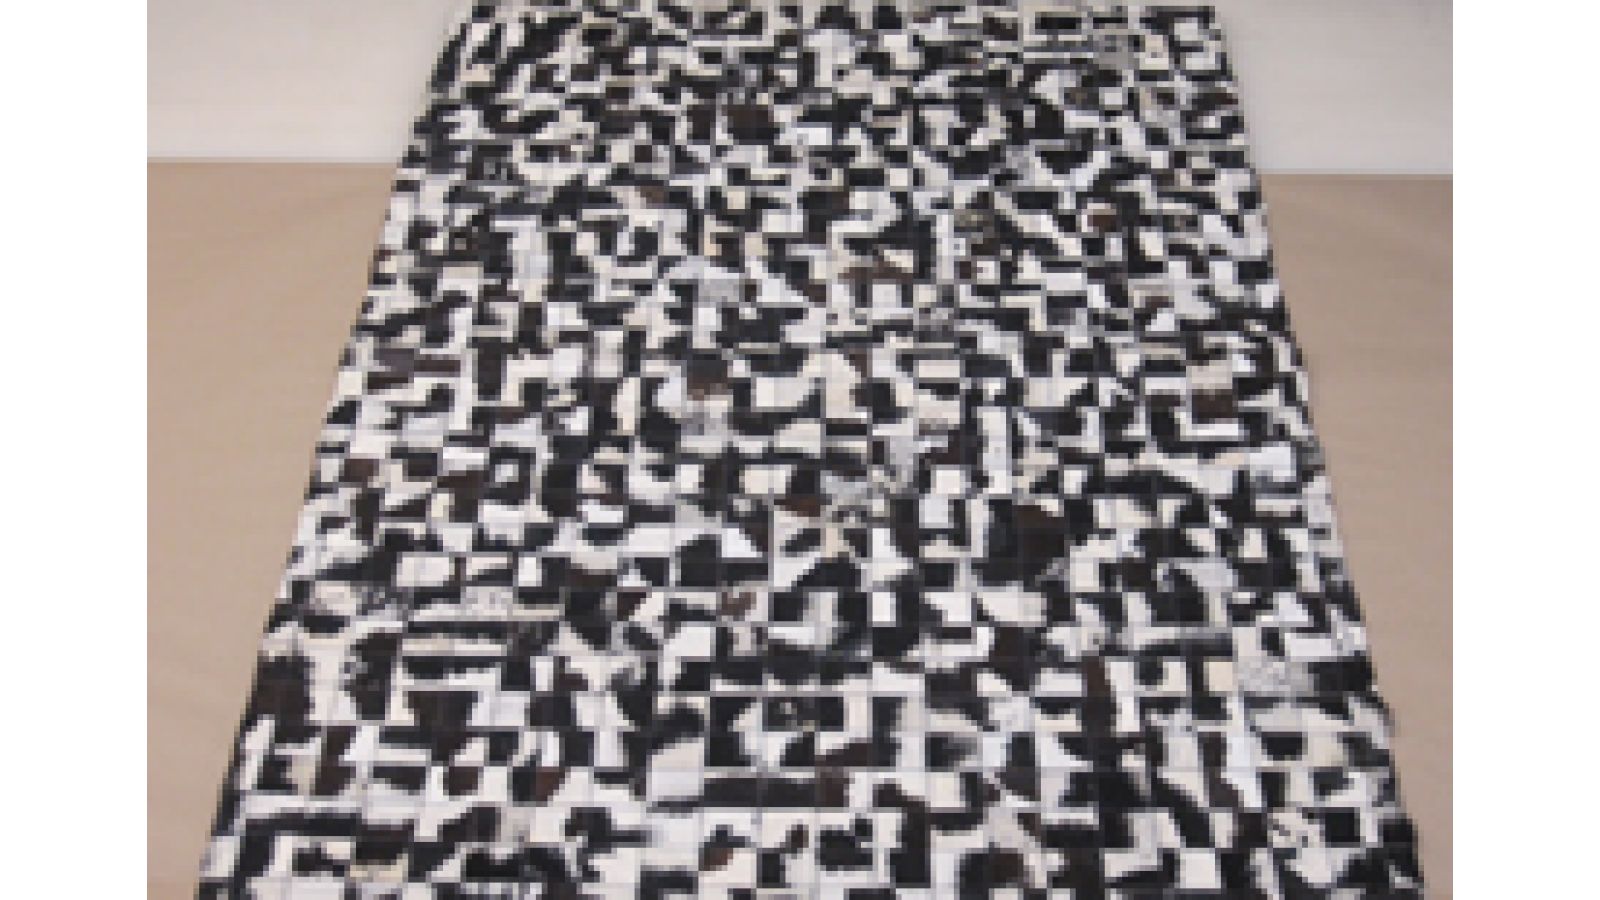 Patchwork Rug 13 Black and White